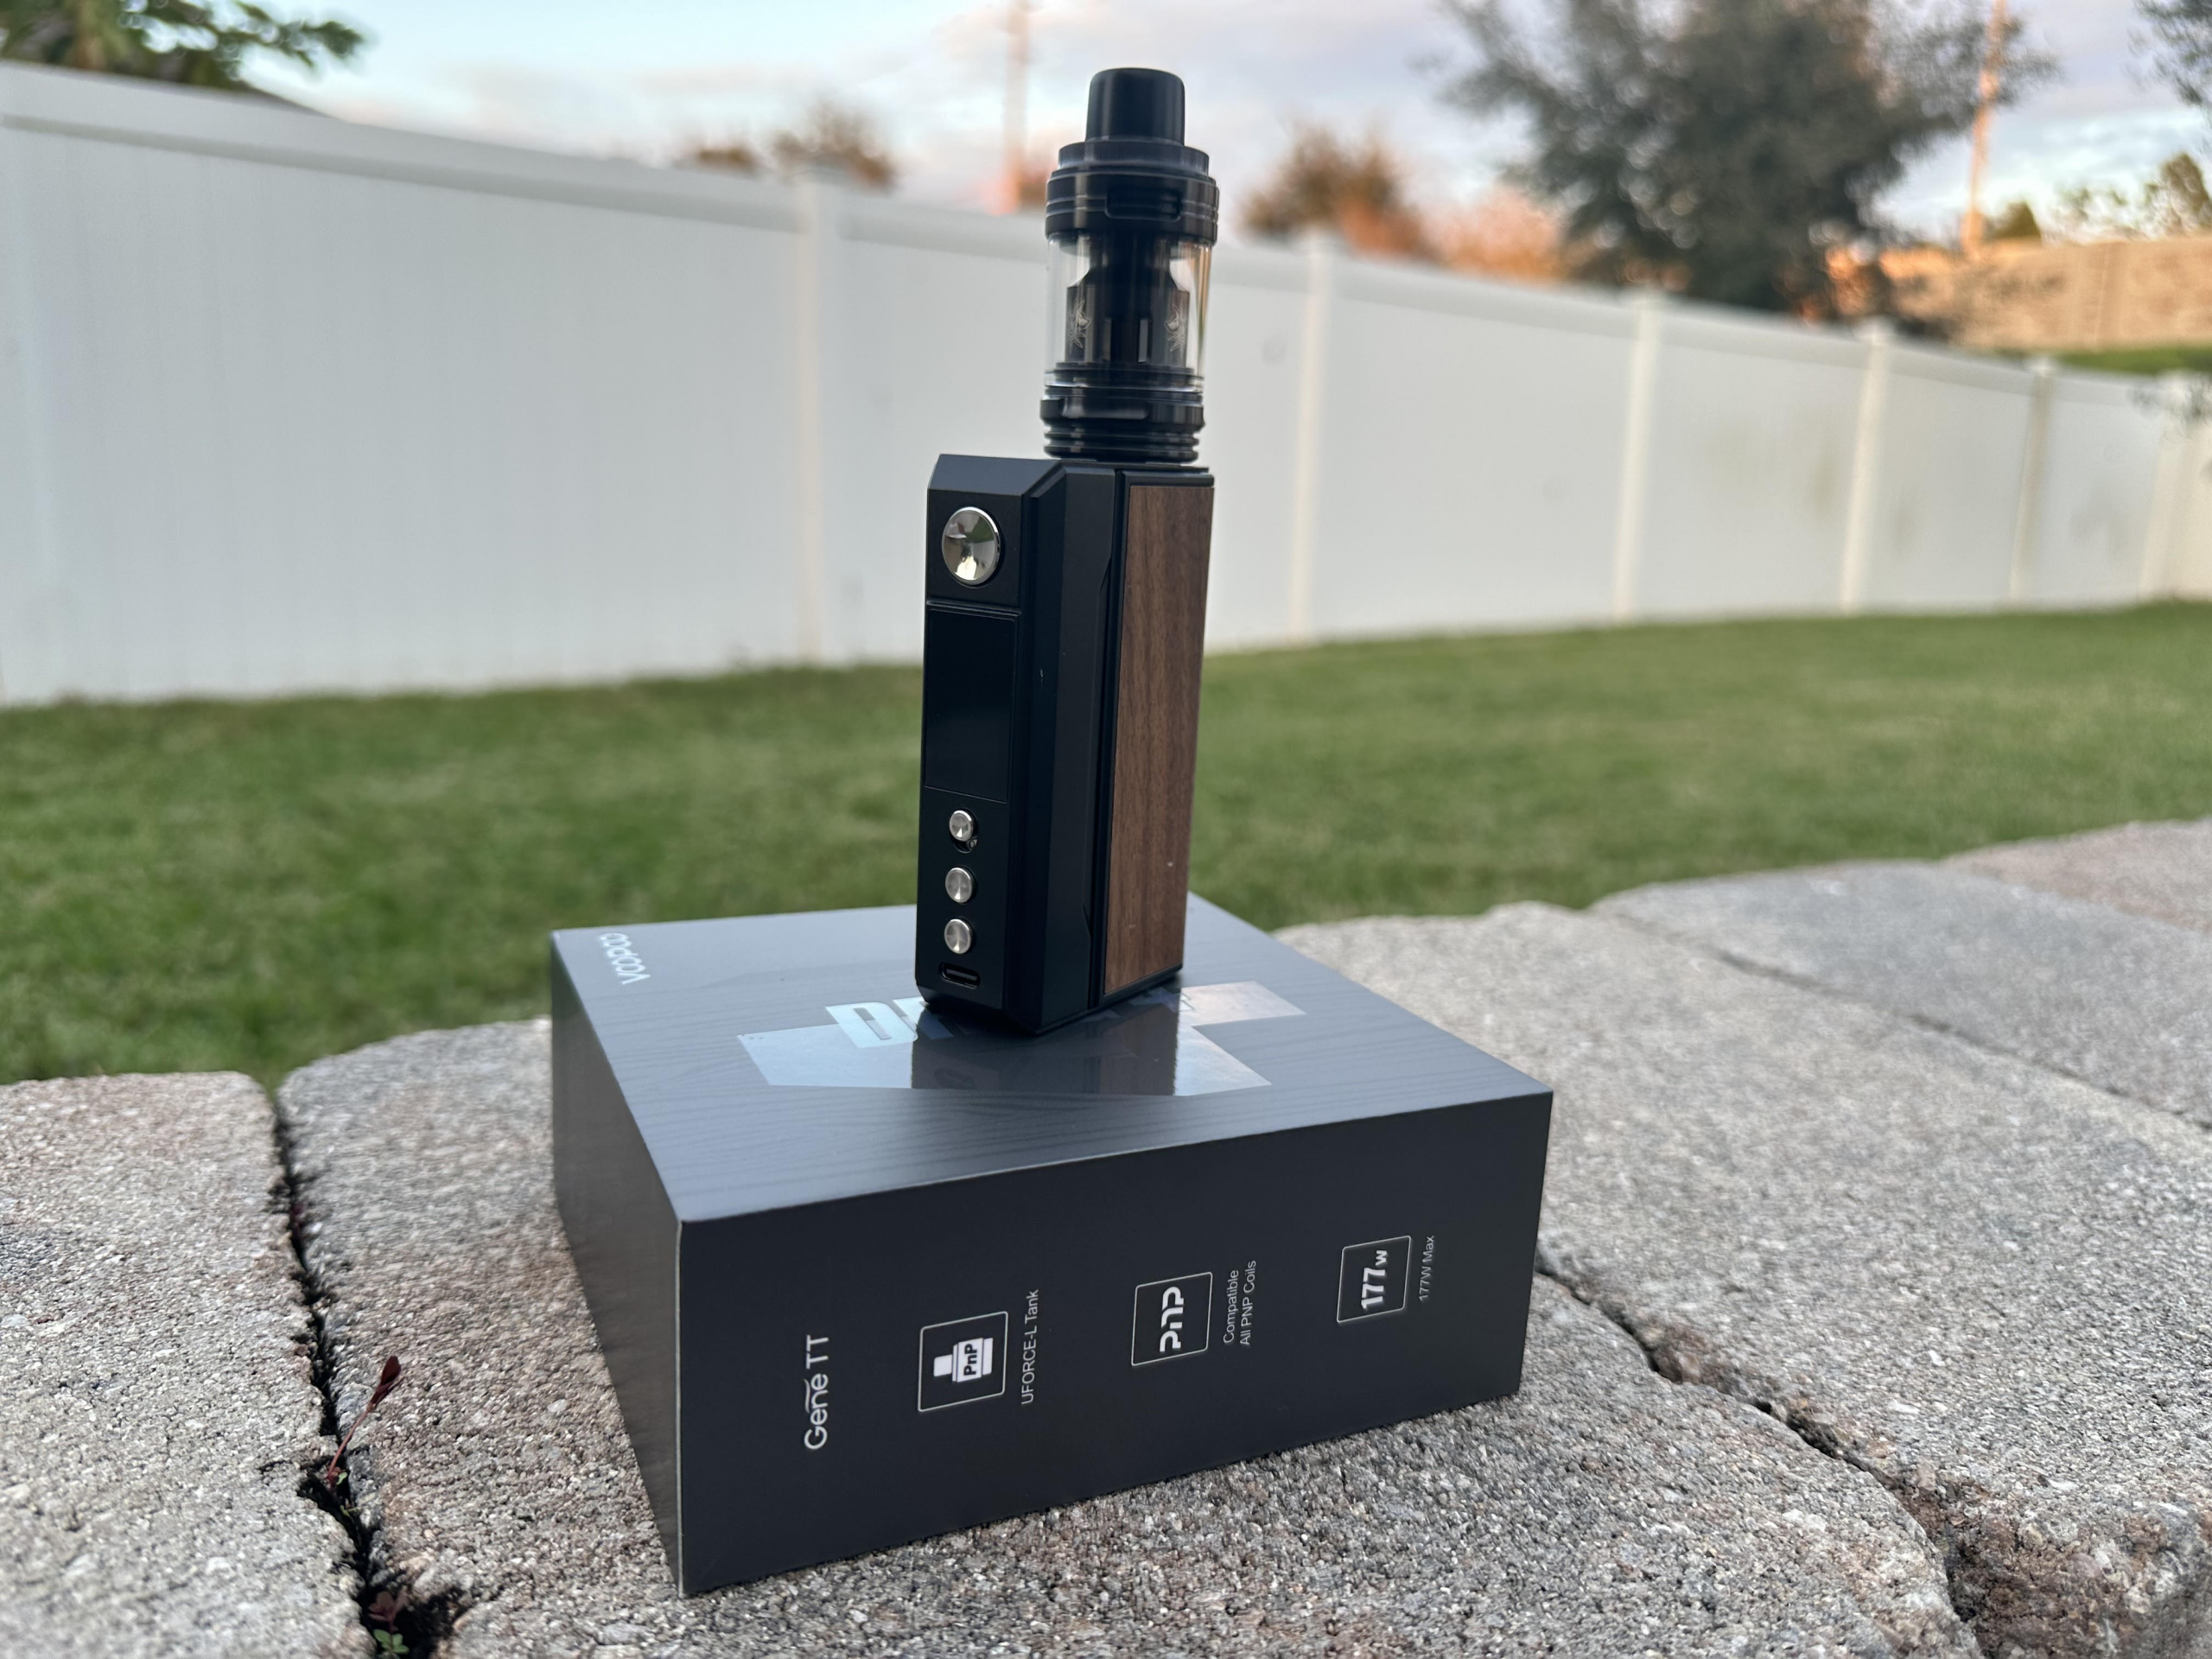 Voopoo drag review image 2 voopoo drag 4 review